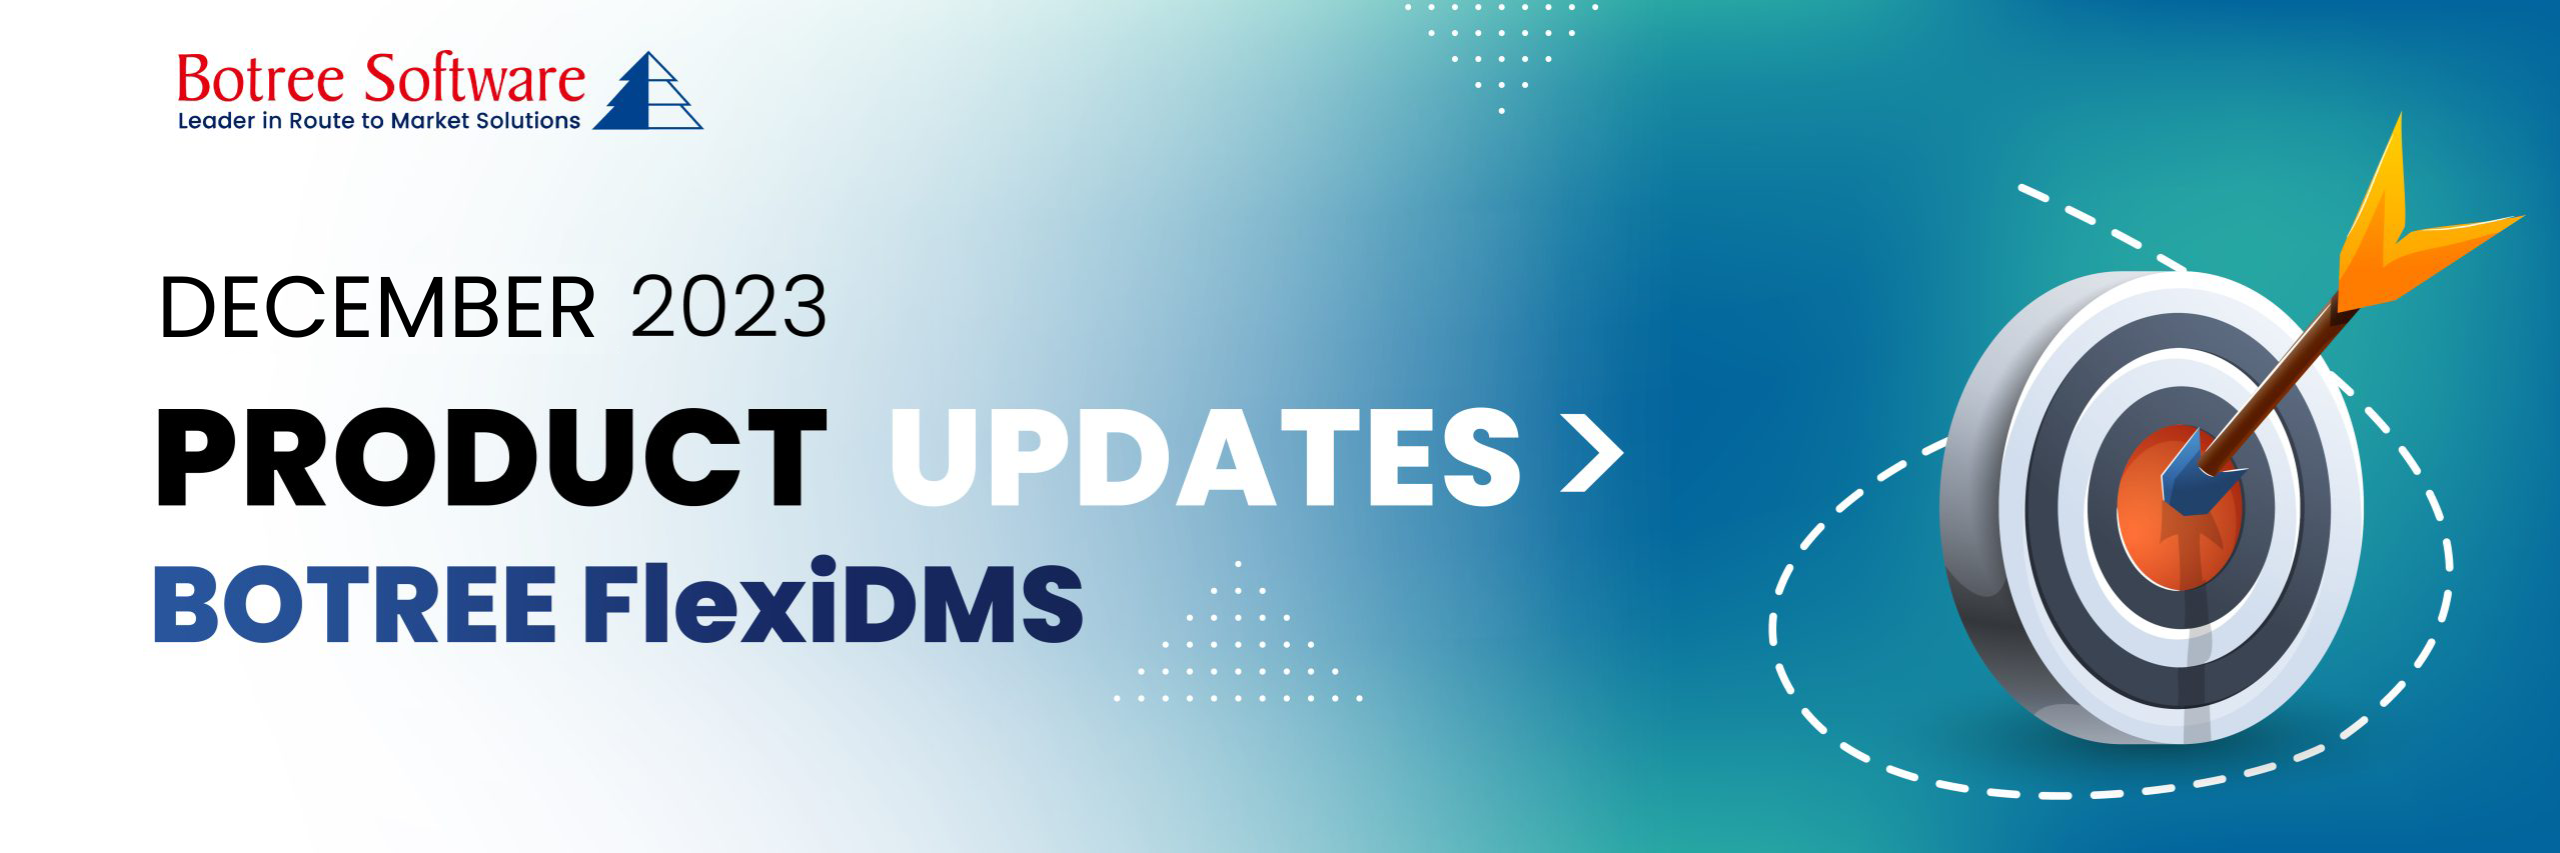 FlexiDMS Product Update Banner